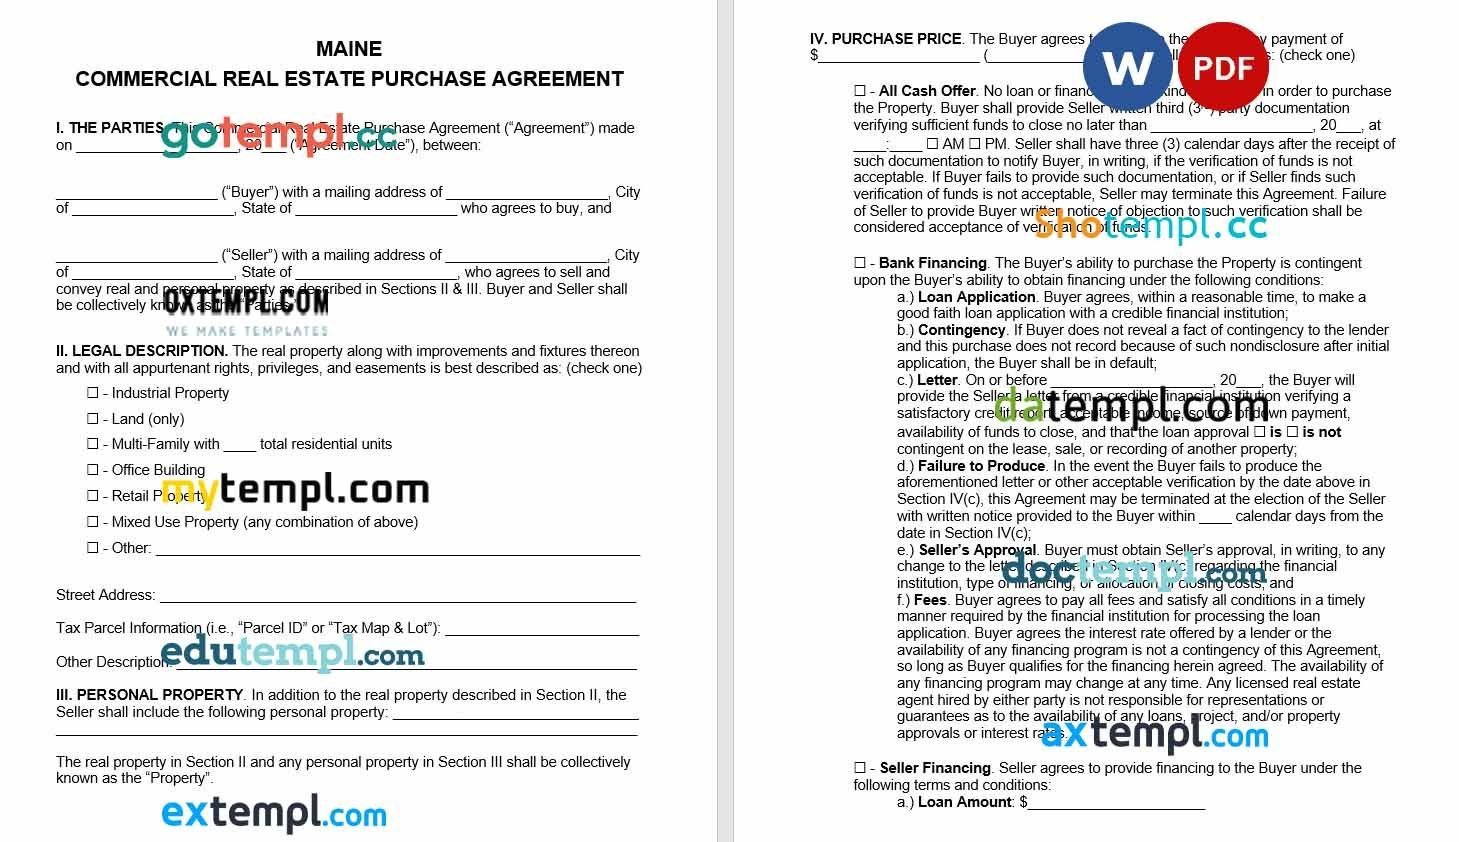 Maine Commercial Real Estate Purchase Agreement Word example, completely editable